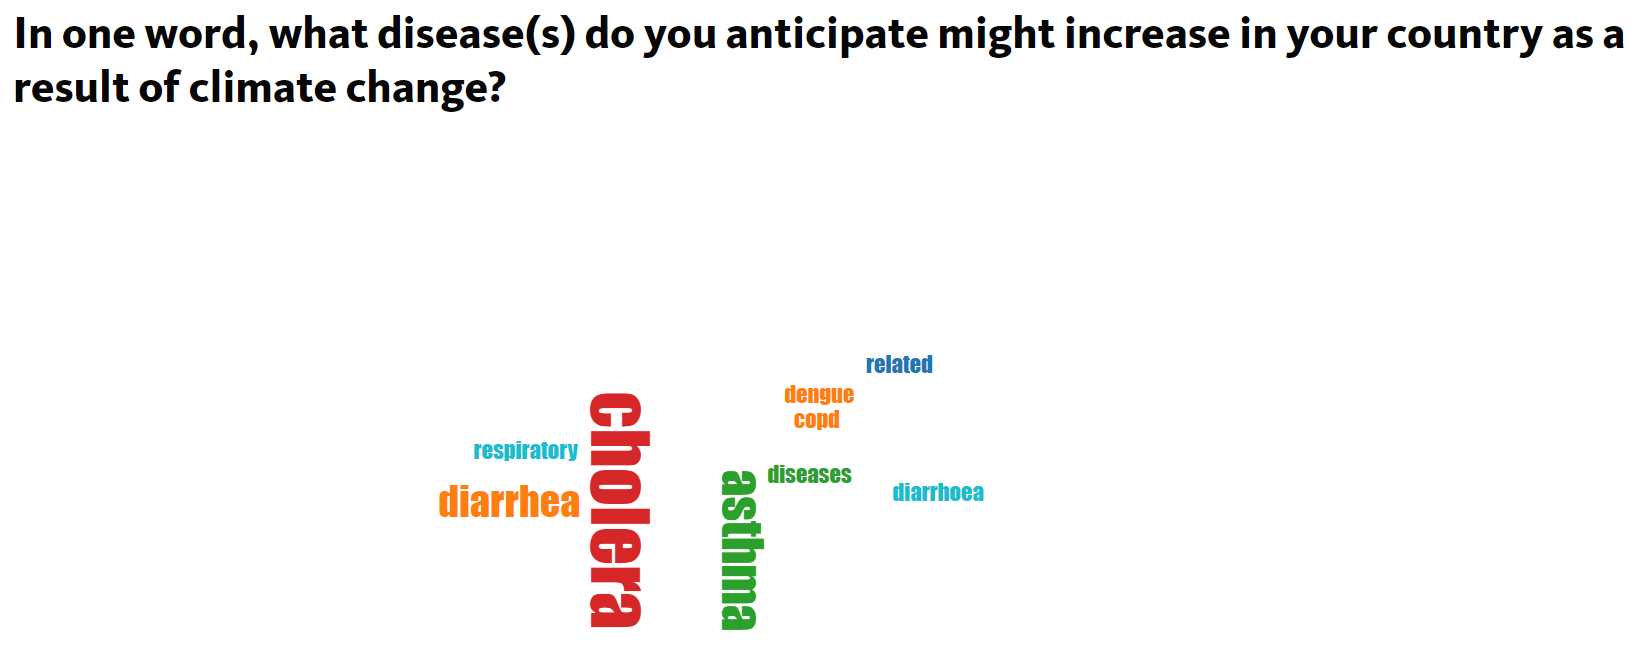 Poll showing diseases that will increase due to climate change